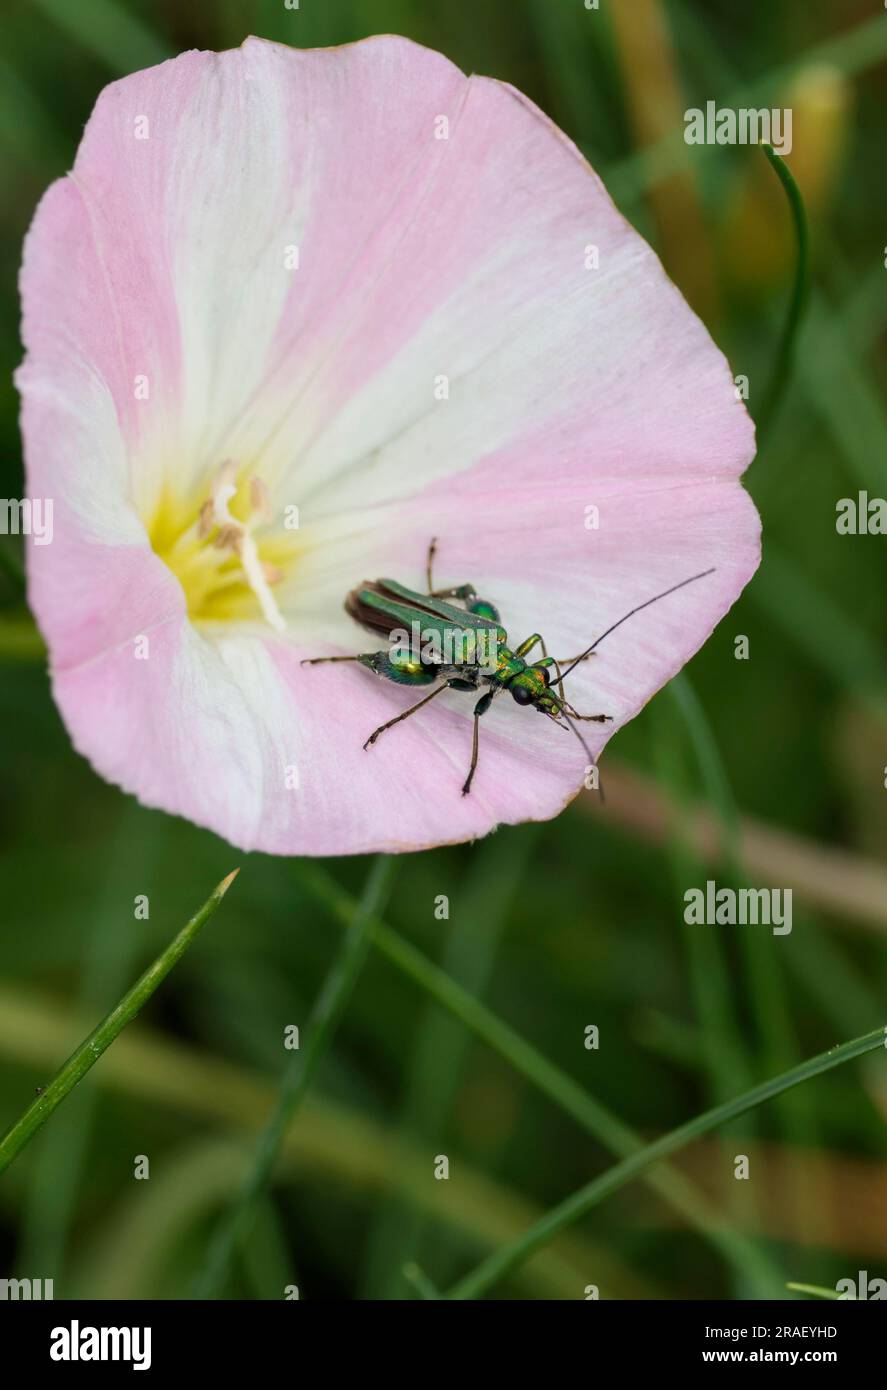 Oedemera nobilis small shiny slender green beetle male has swollen hind femora elytra taper and splay towards tip of abdomen don't cover all of wings Stock Photo